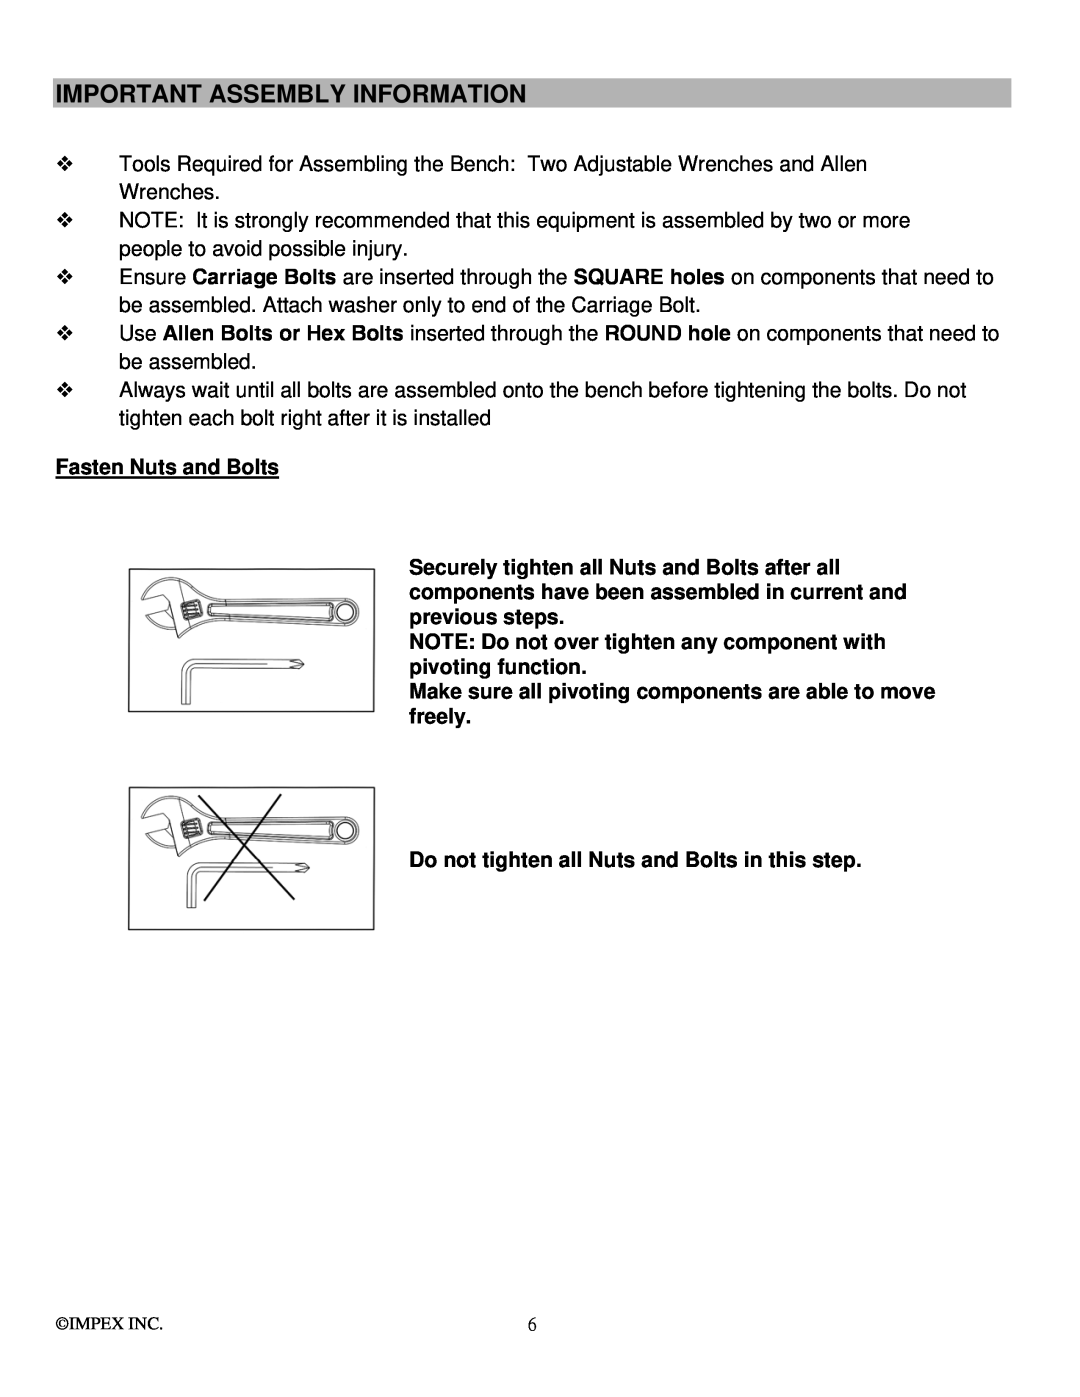 Impex SAG-44.0 manual Important Assembly Information 